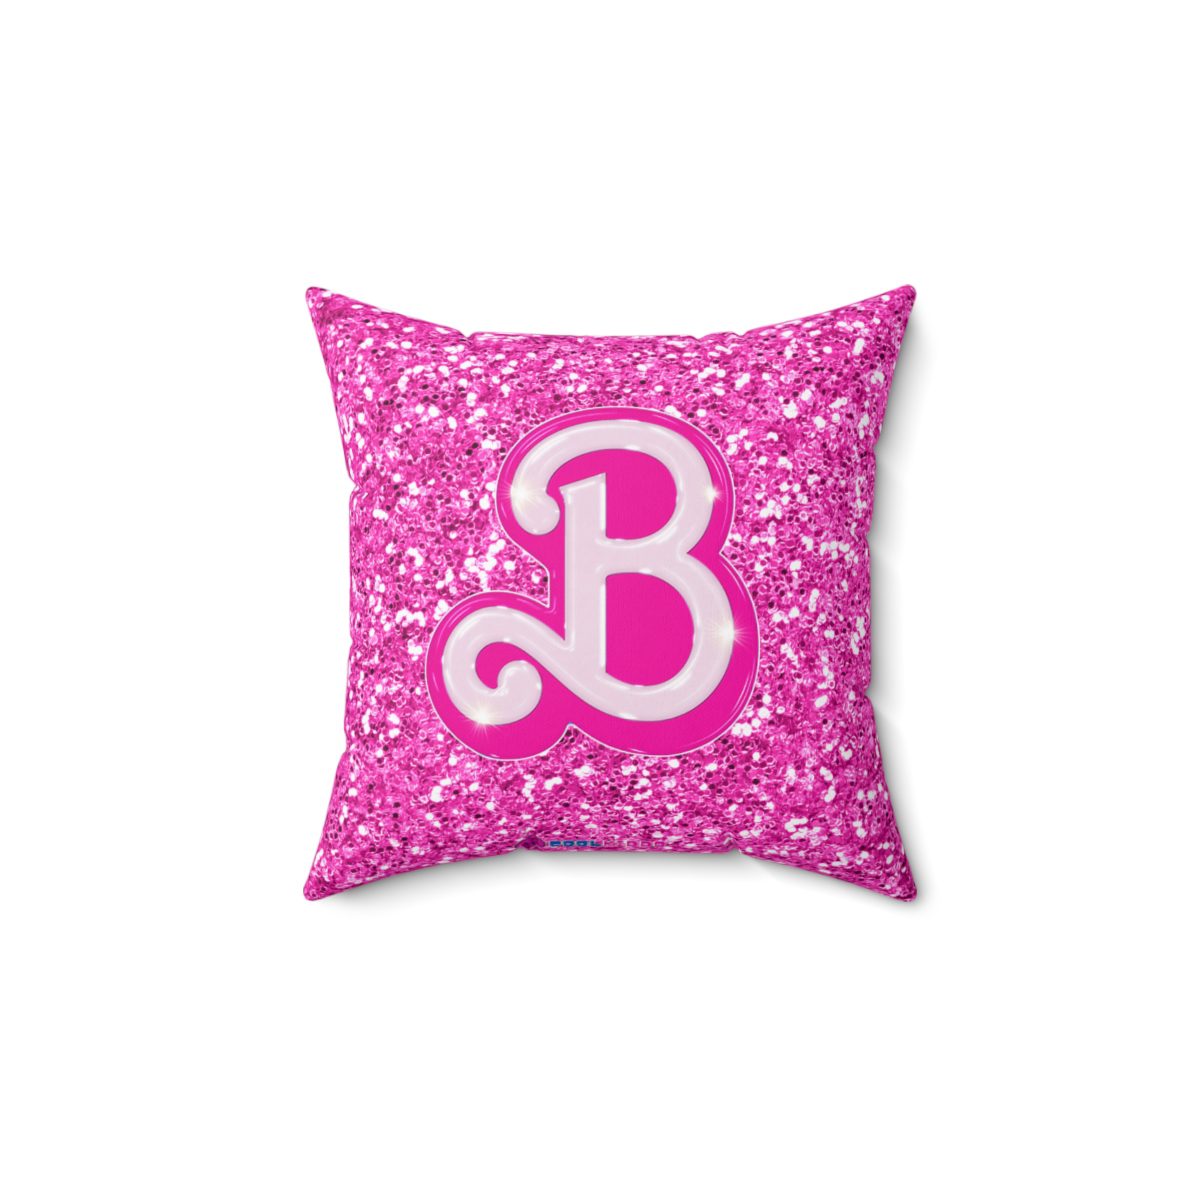 Barbie Glitter Simulation Pink Cushion: Double-Sided Sparkle for Stylish Comfort Cool Kiddo 14